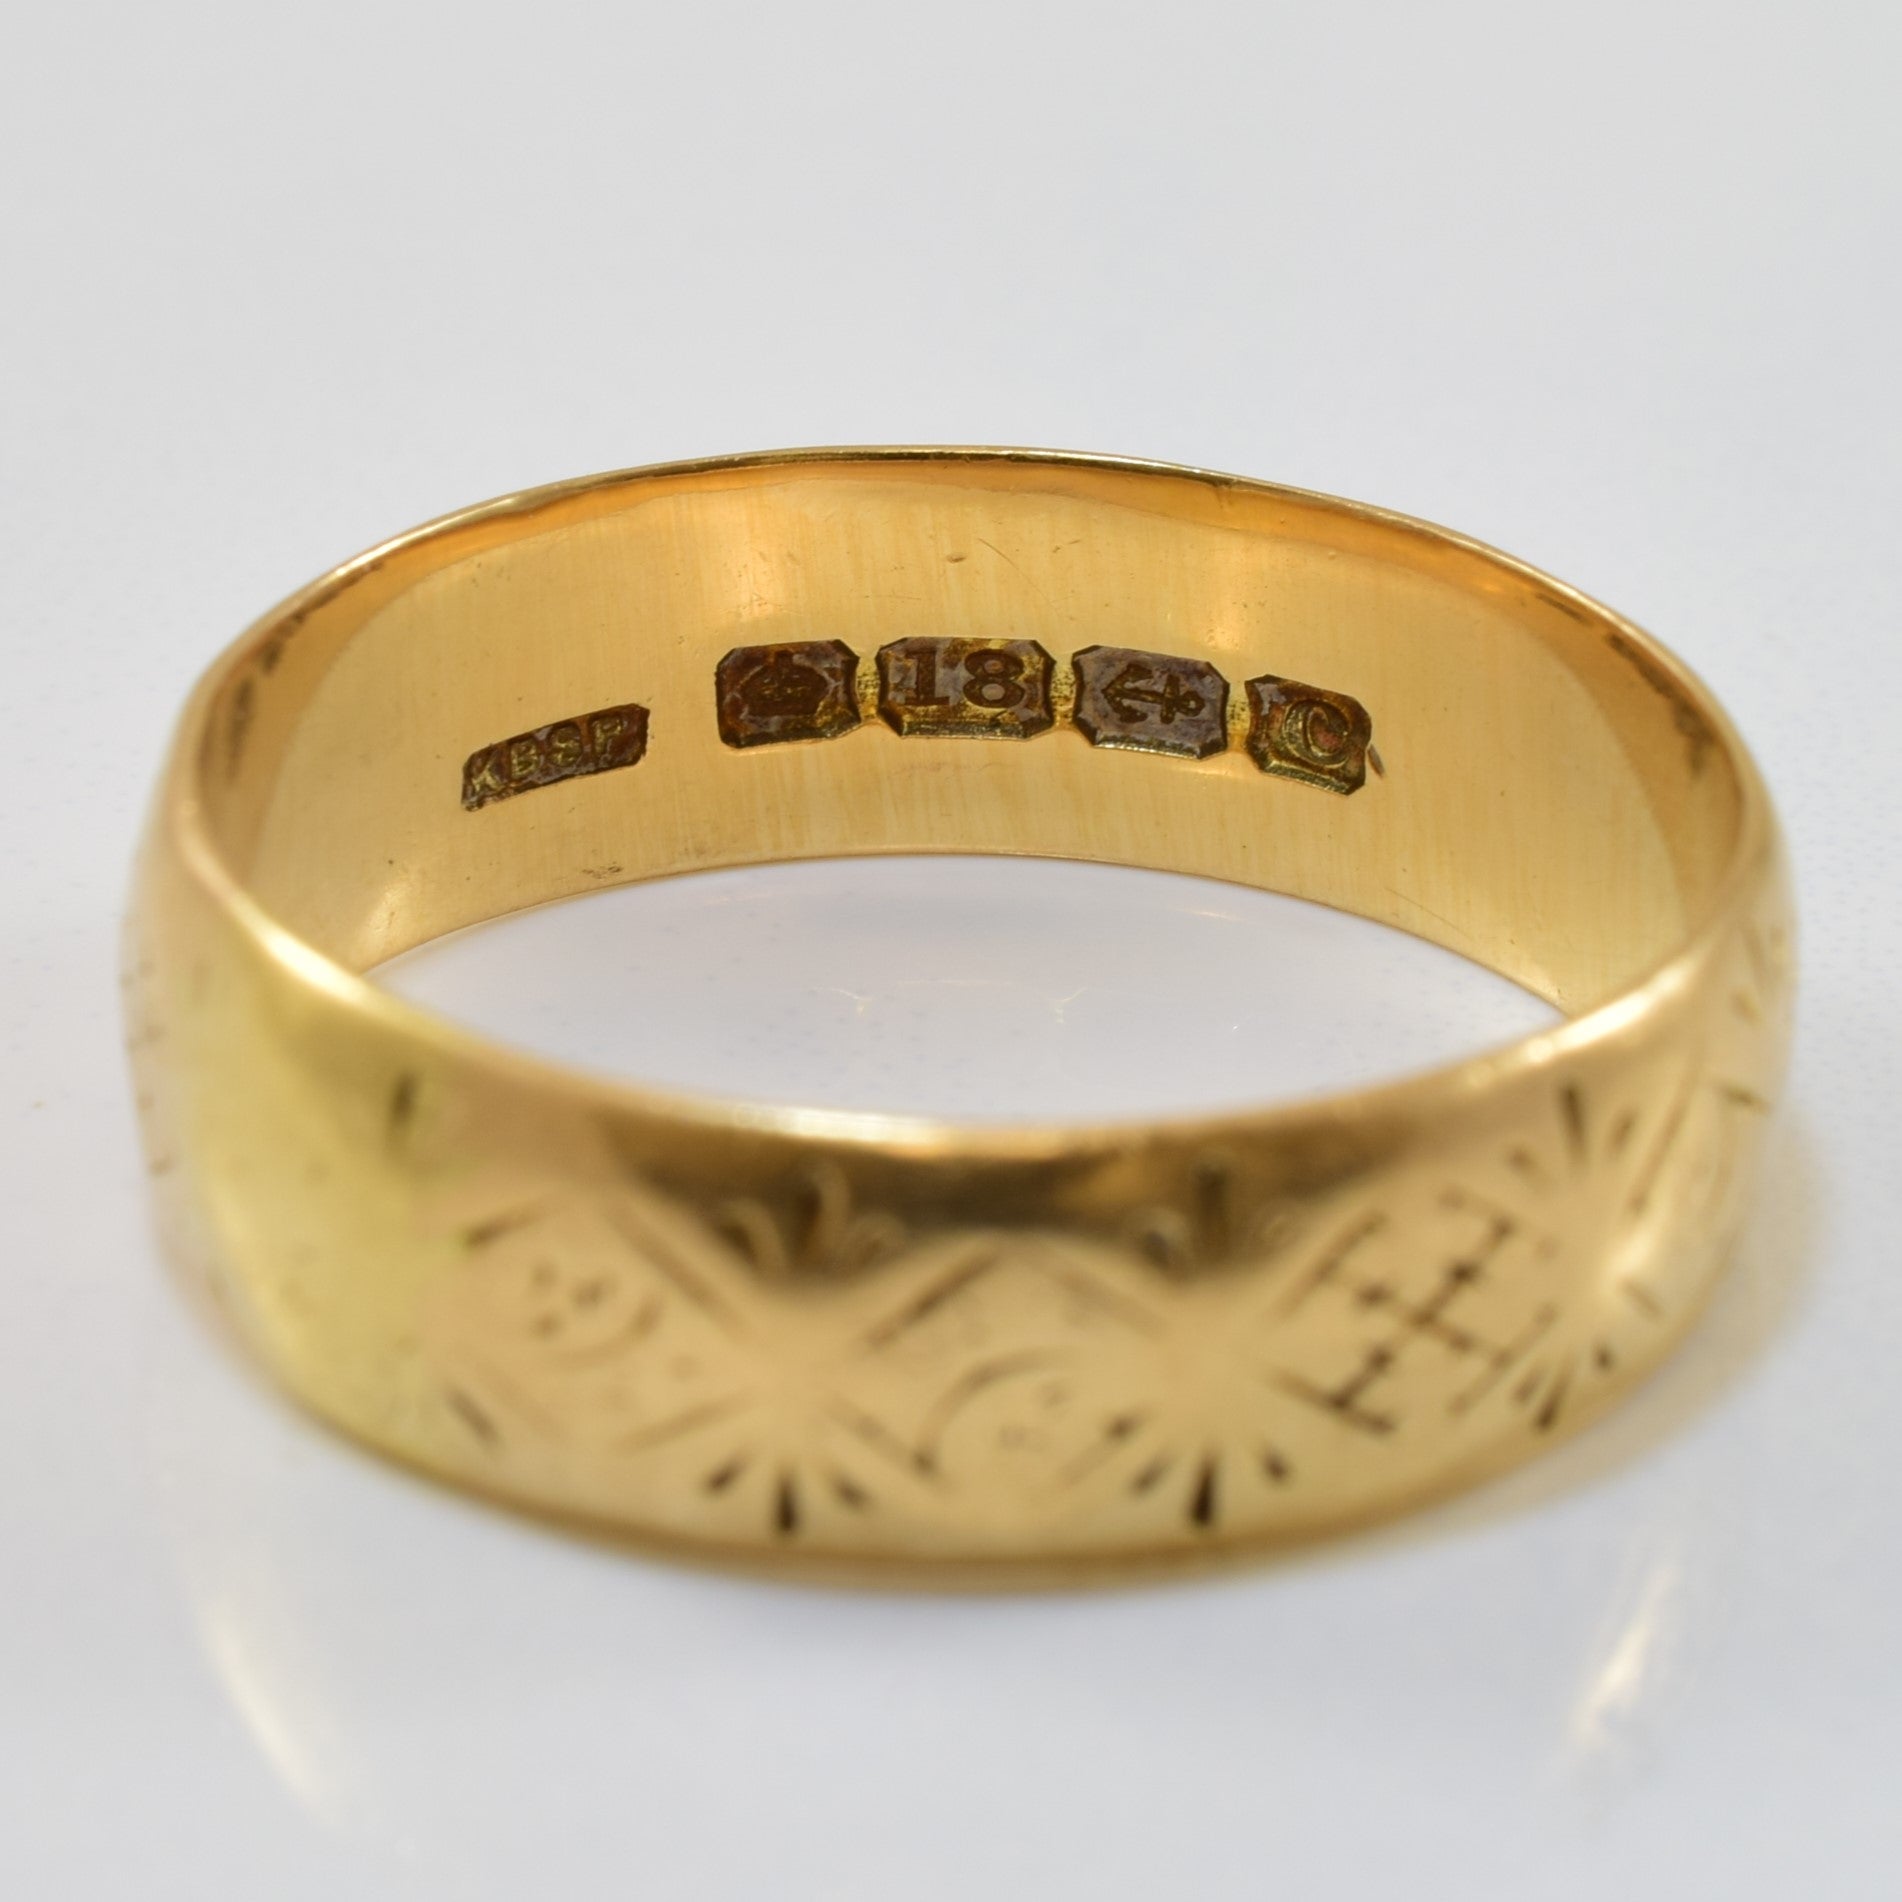 Early 1900s Patterned Band | SZ 11 |